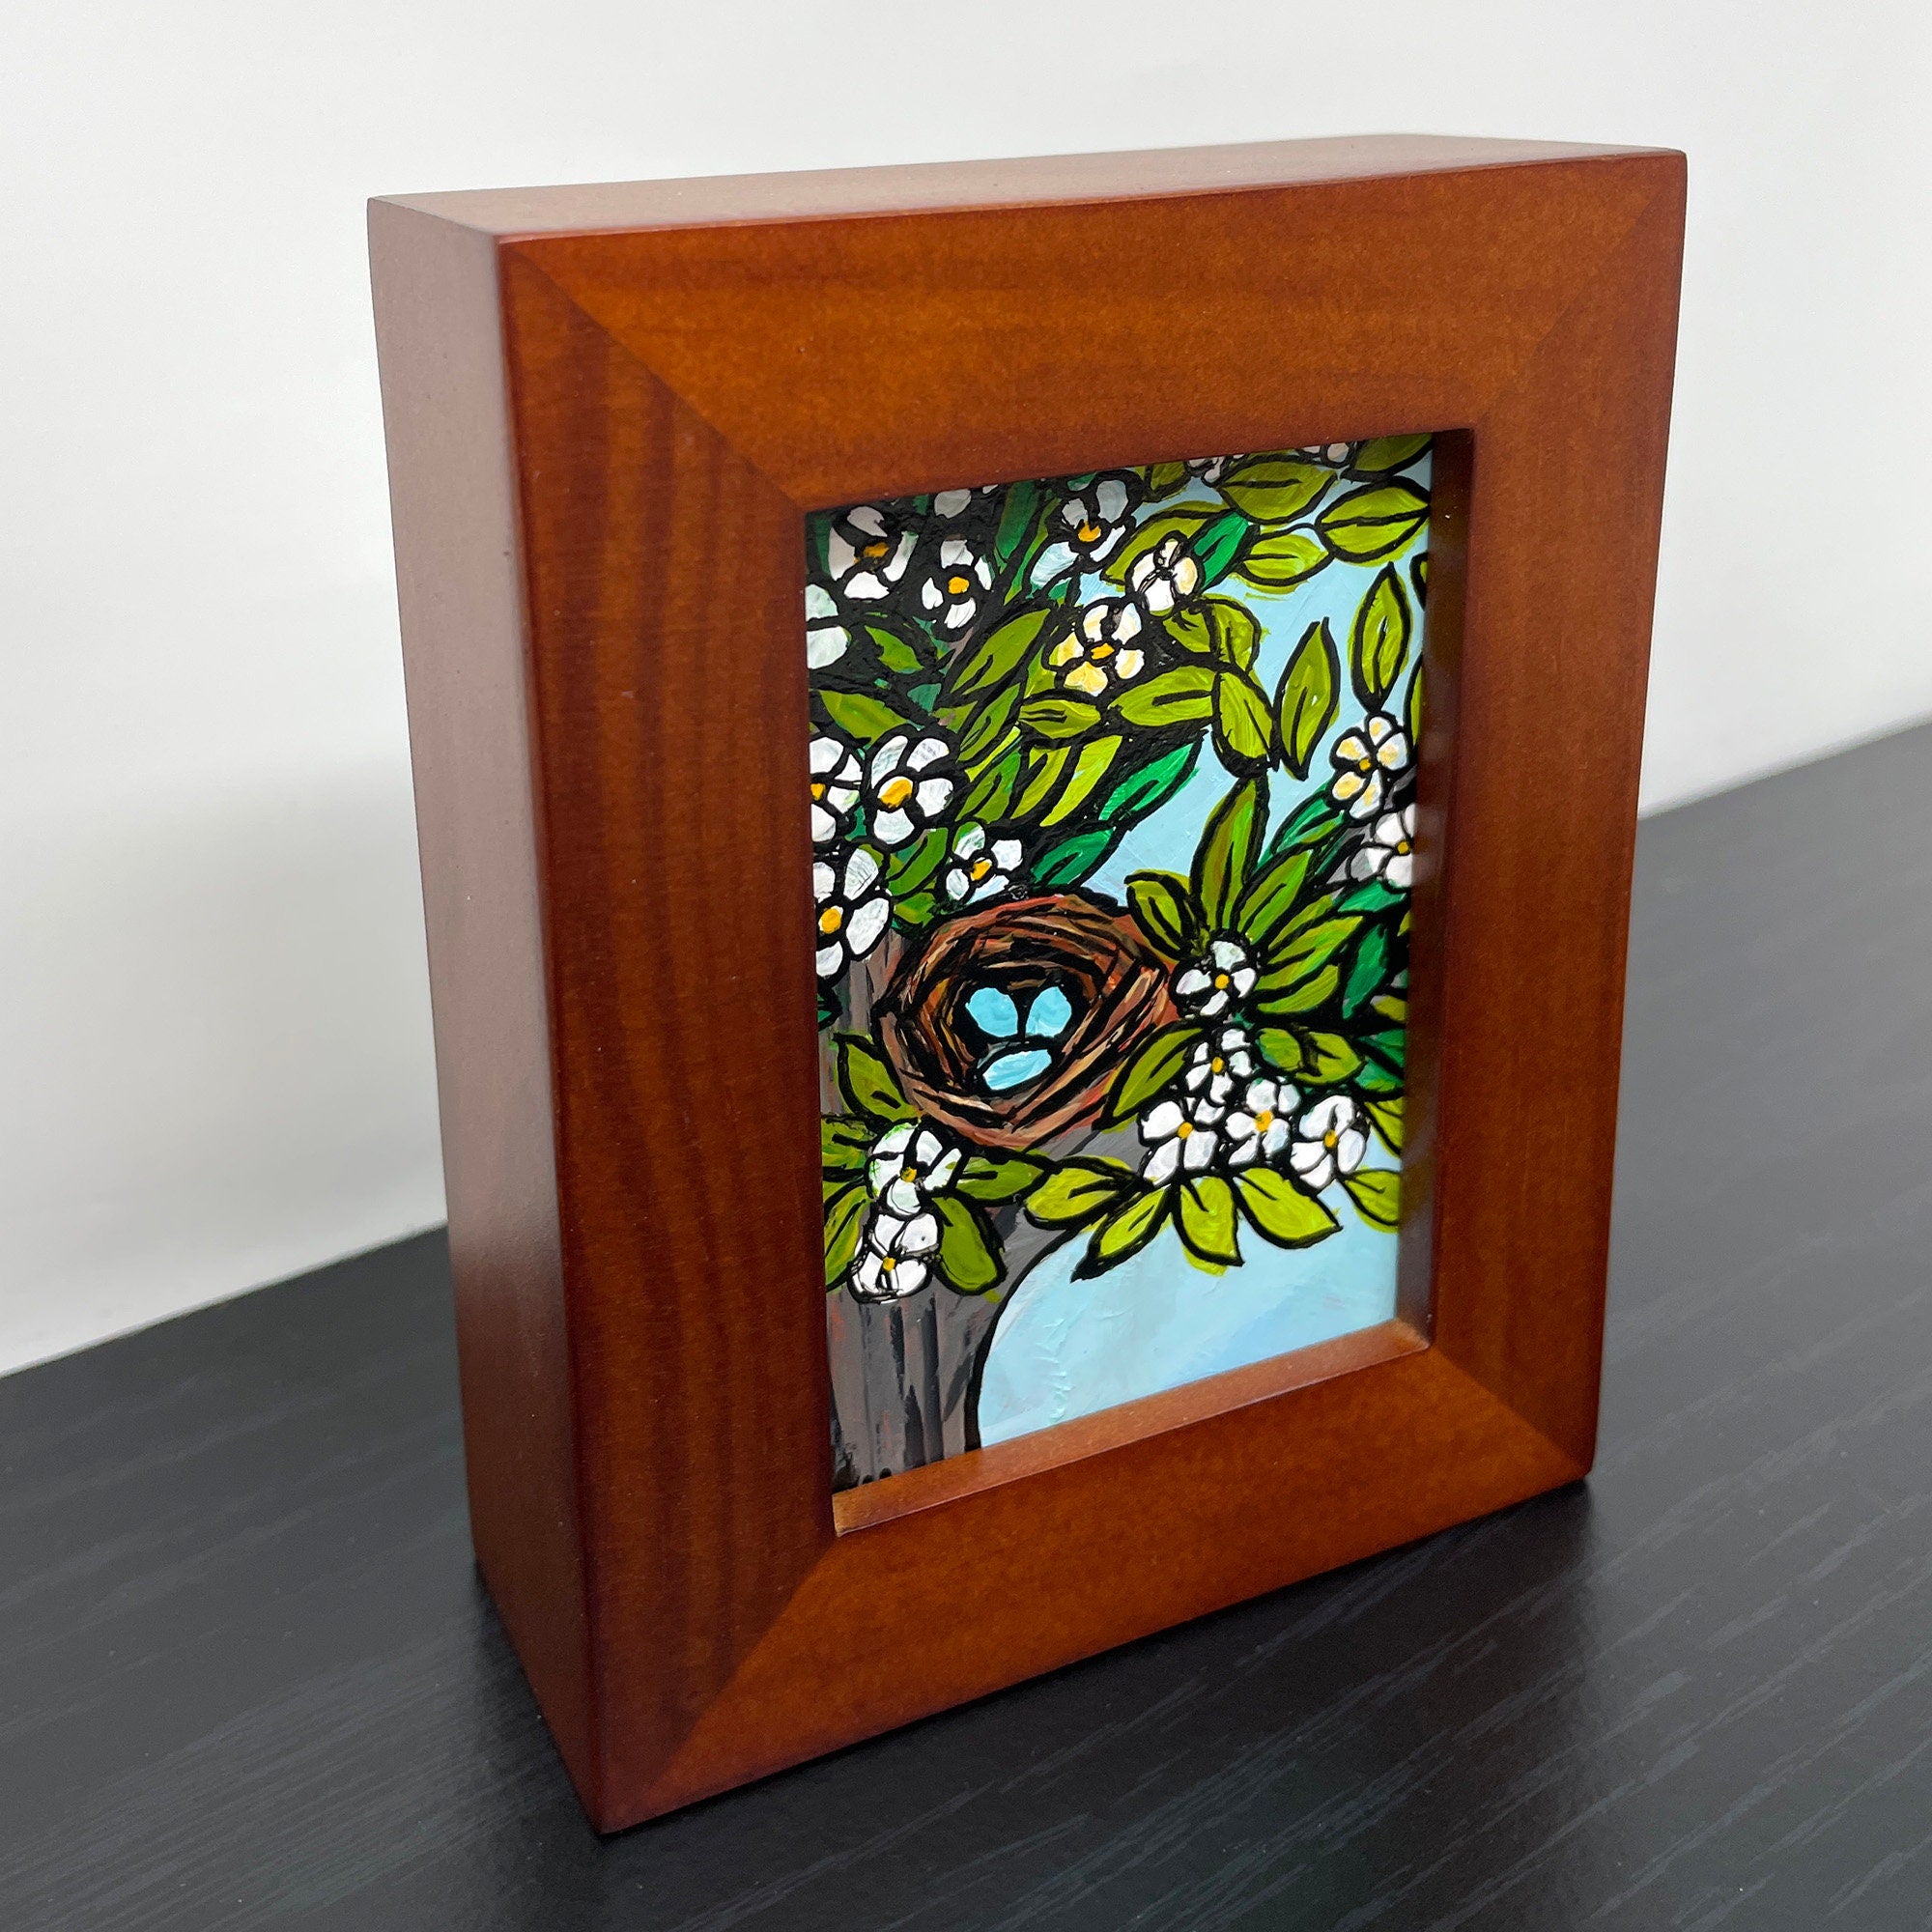 side view of Robin&#39;s Nest painting in brown wood frame. Painting shows blue robin&#39;s eggs in a brown nest in a tree with flowers and leaves. Light blue sky is visible between the branches.